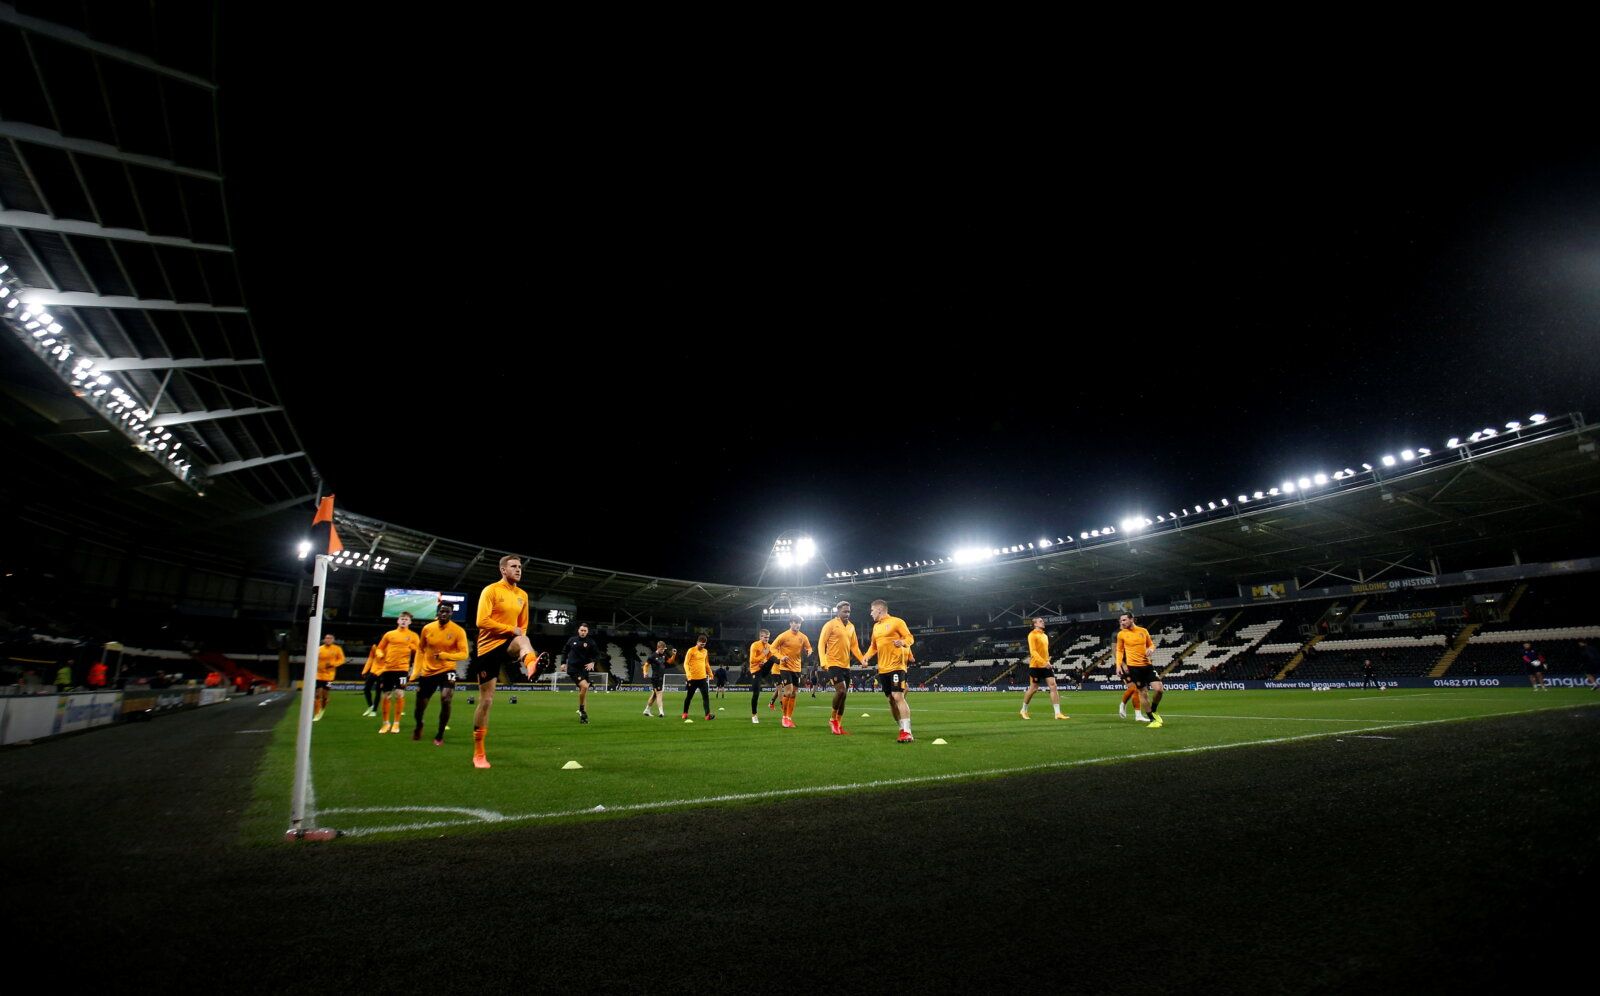 Soccer Football - Championship - Hull City v Blackpool - KCOM Stadium, Hull, Britain - September 28, 2021  General view as Hull City players warm up before the match  Action Images/Ed Sykes  EDITORIAL USE ONLY. No use with unauthorized audio, video, data, fixture lists, club/league logos or 